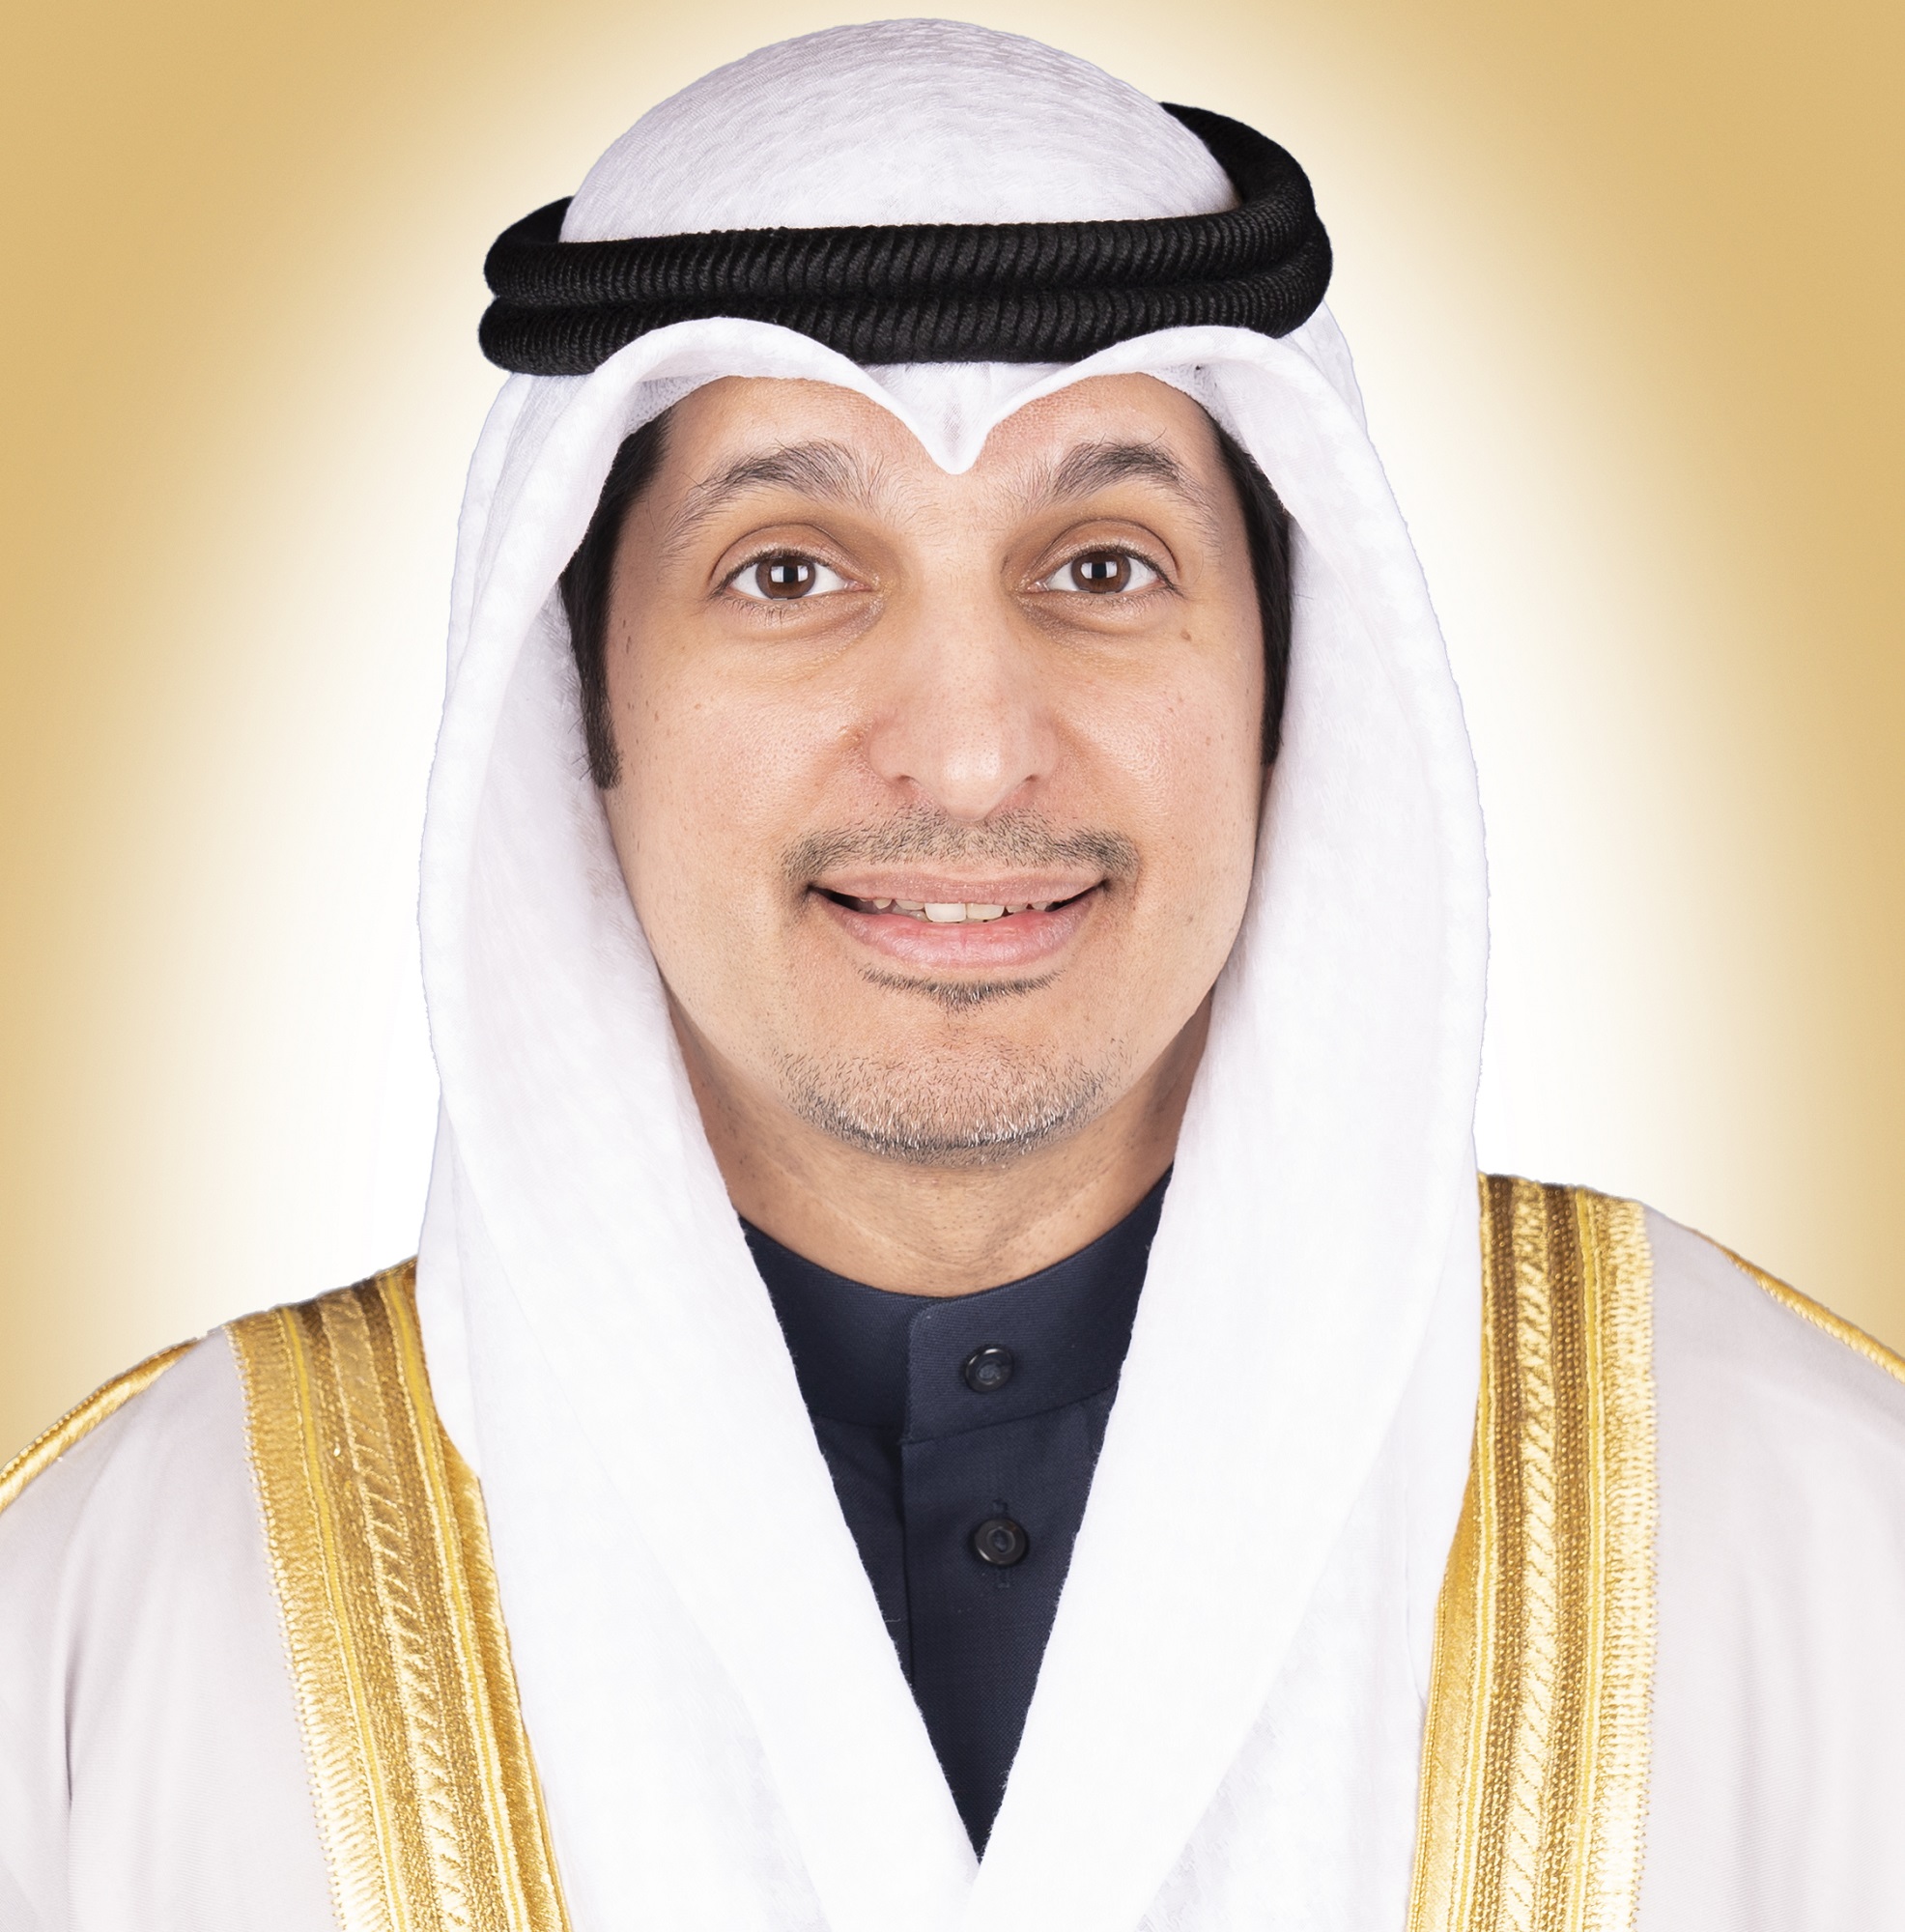 Minister of Information and Minister of State for Youth Affairs Abdulrahman Al-Mutairi